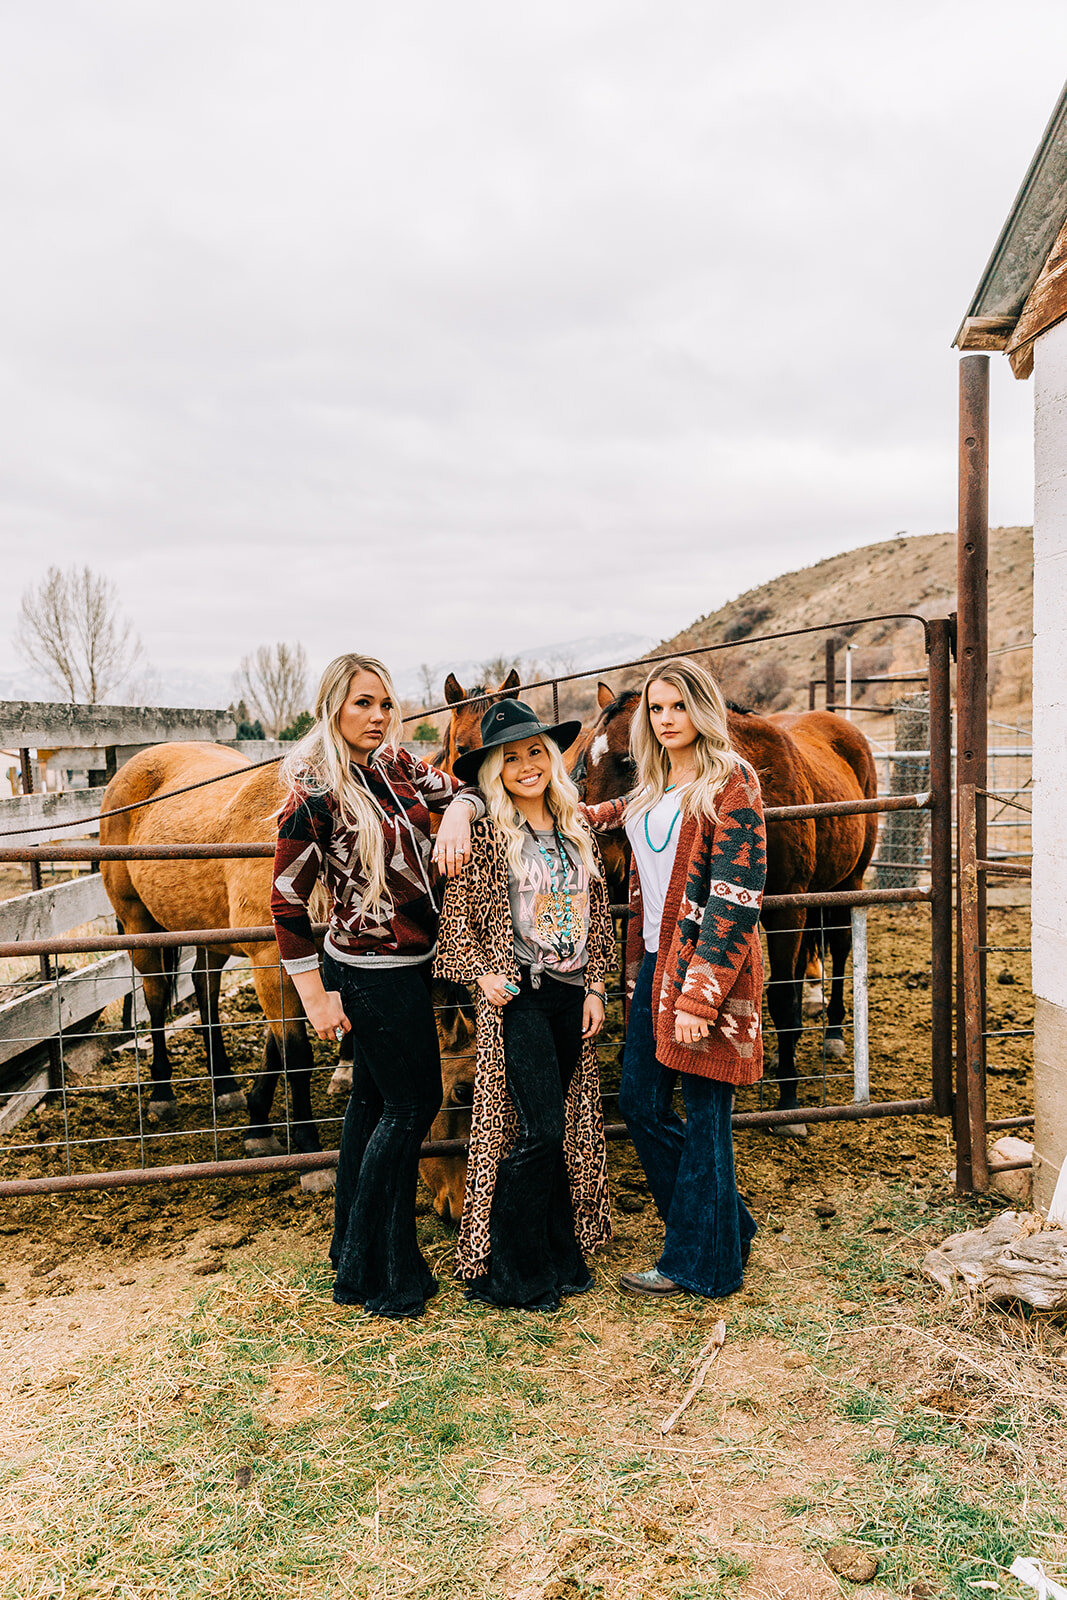  best friends cardigans dusters leopard native prints accent jewelry long hairstyles hair and makeup inspiration country style professional photographers in utah commercial photographers in utah horses wild rag boutique commercial photography product